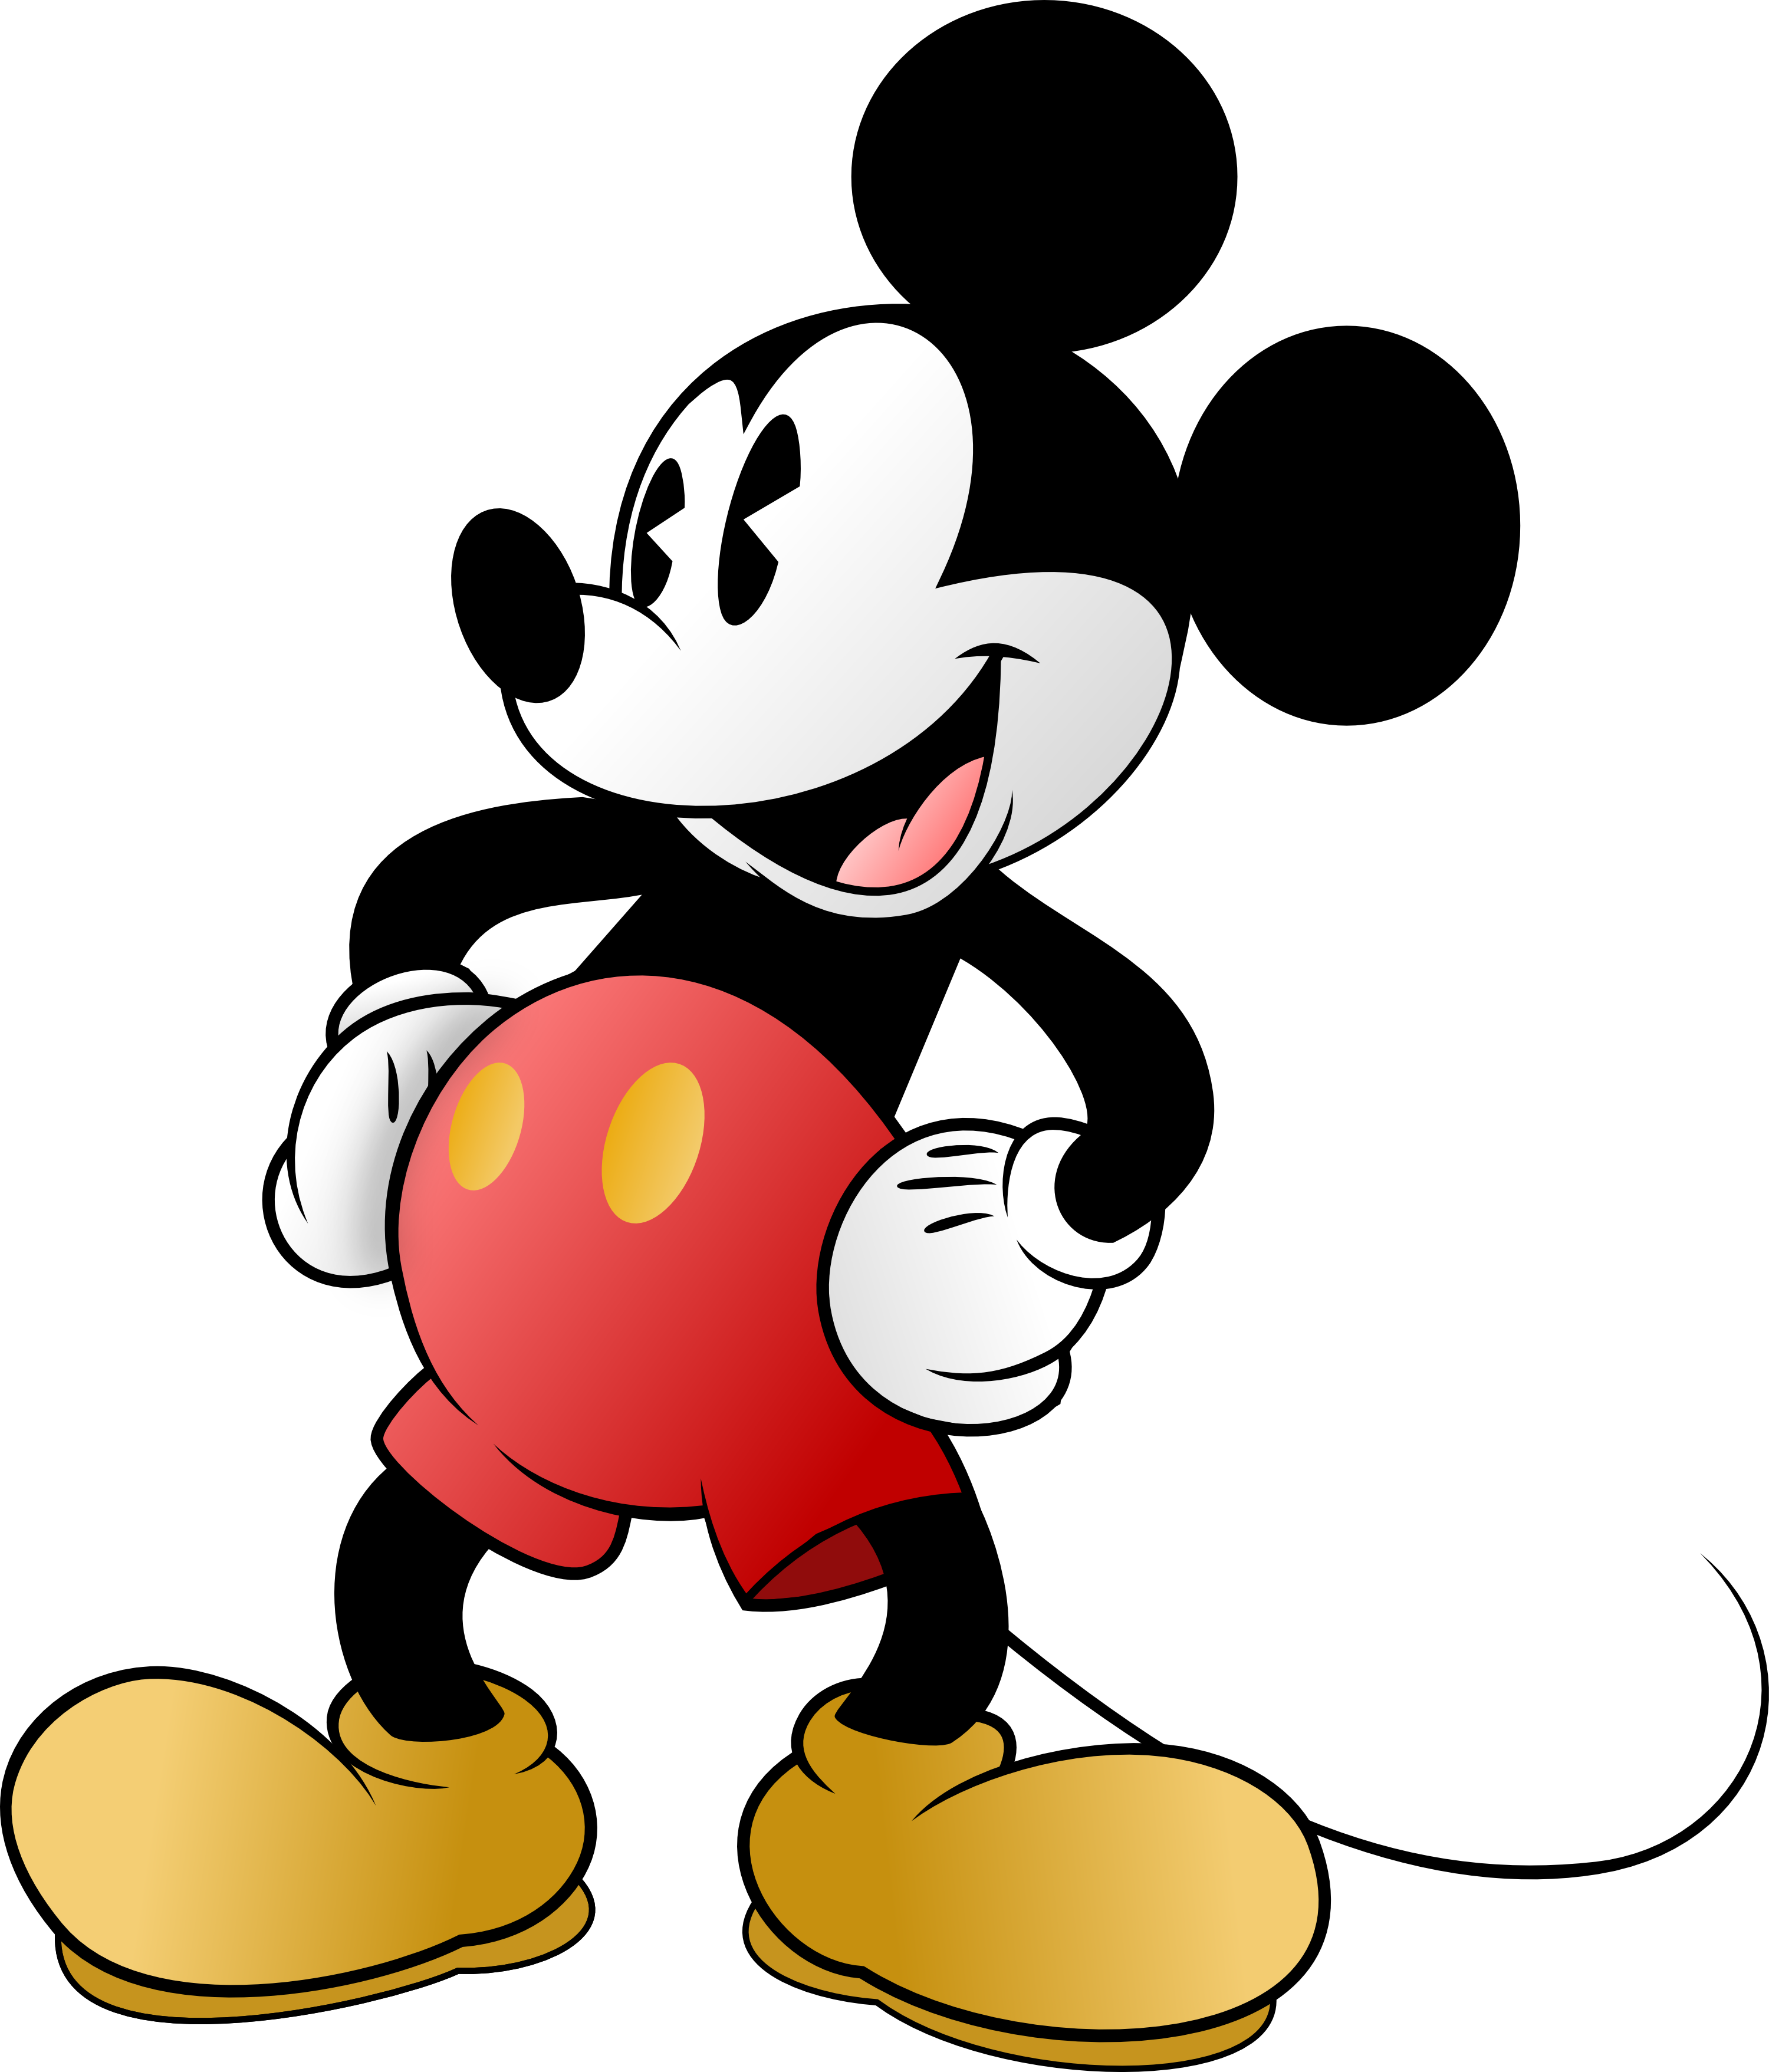 Mickey Mouse | HD Wallpapers Tab